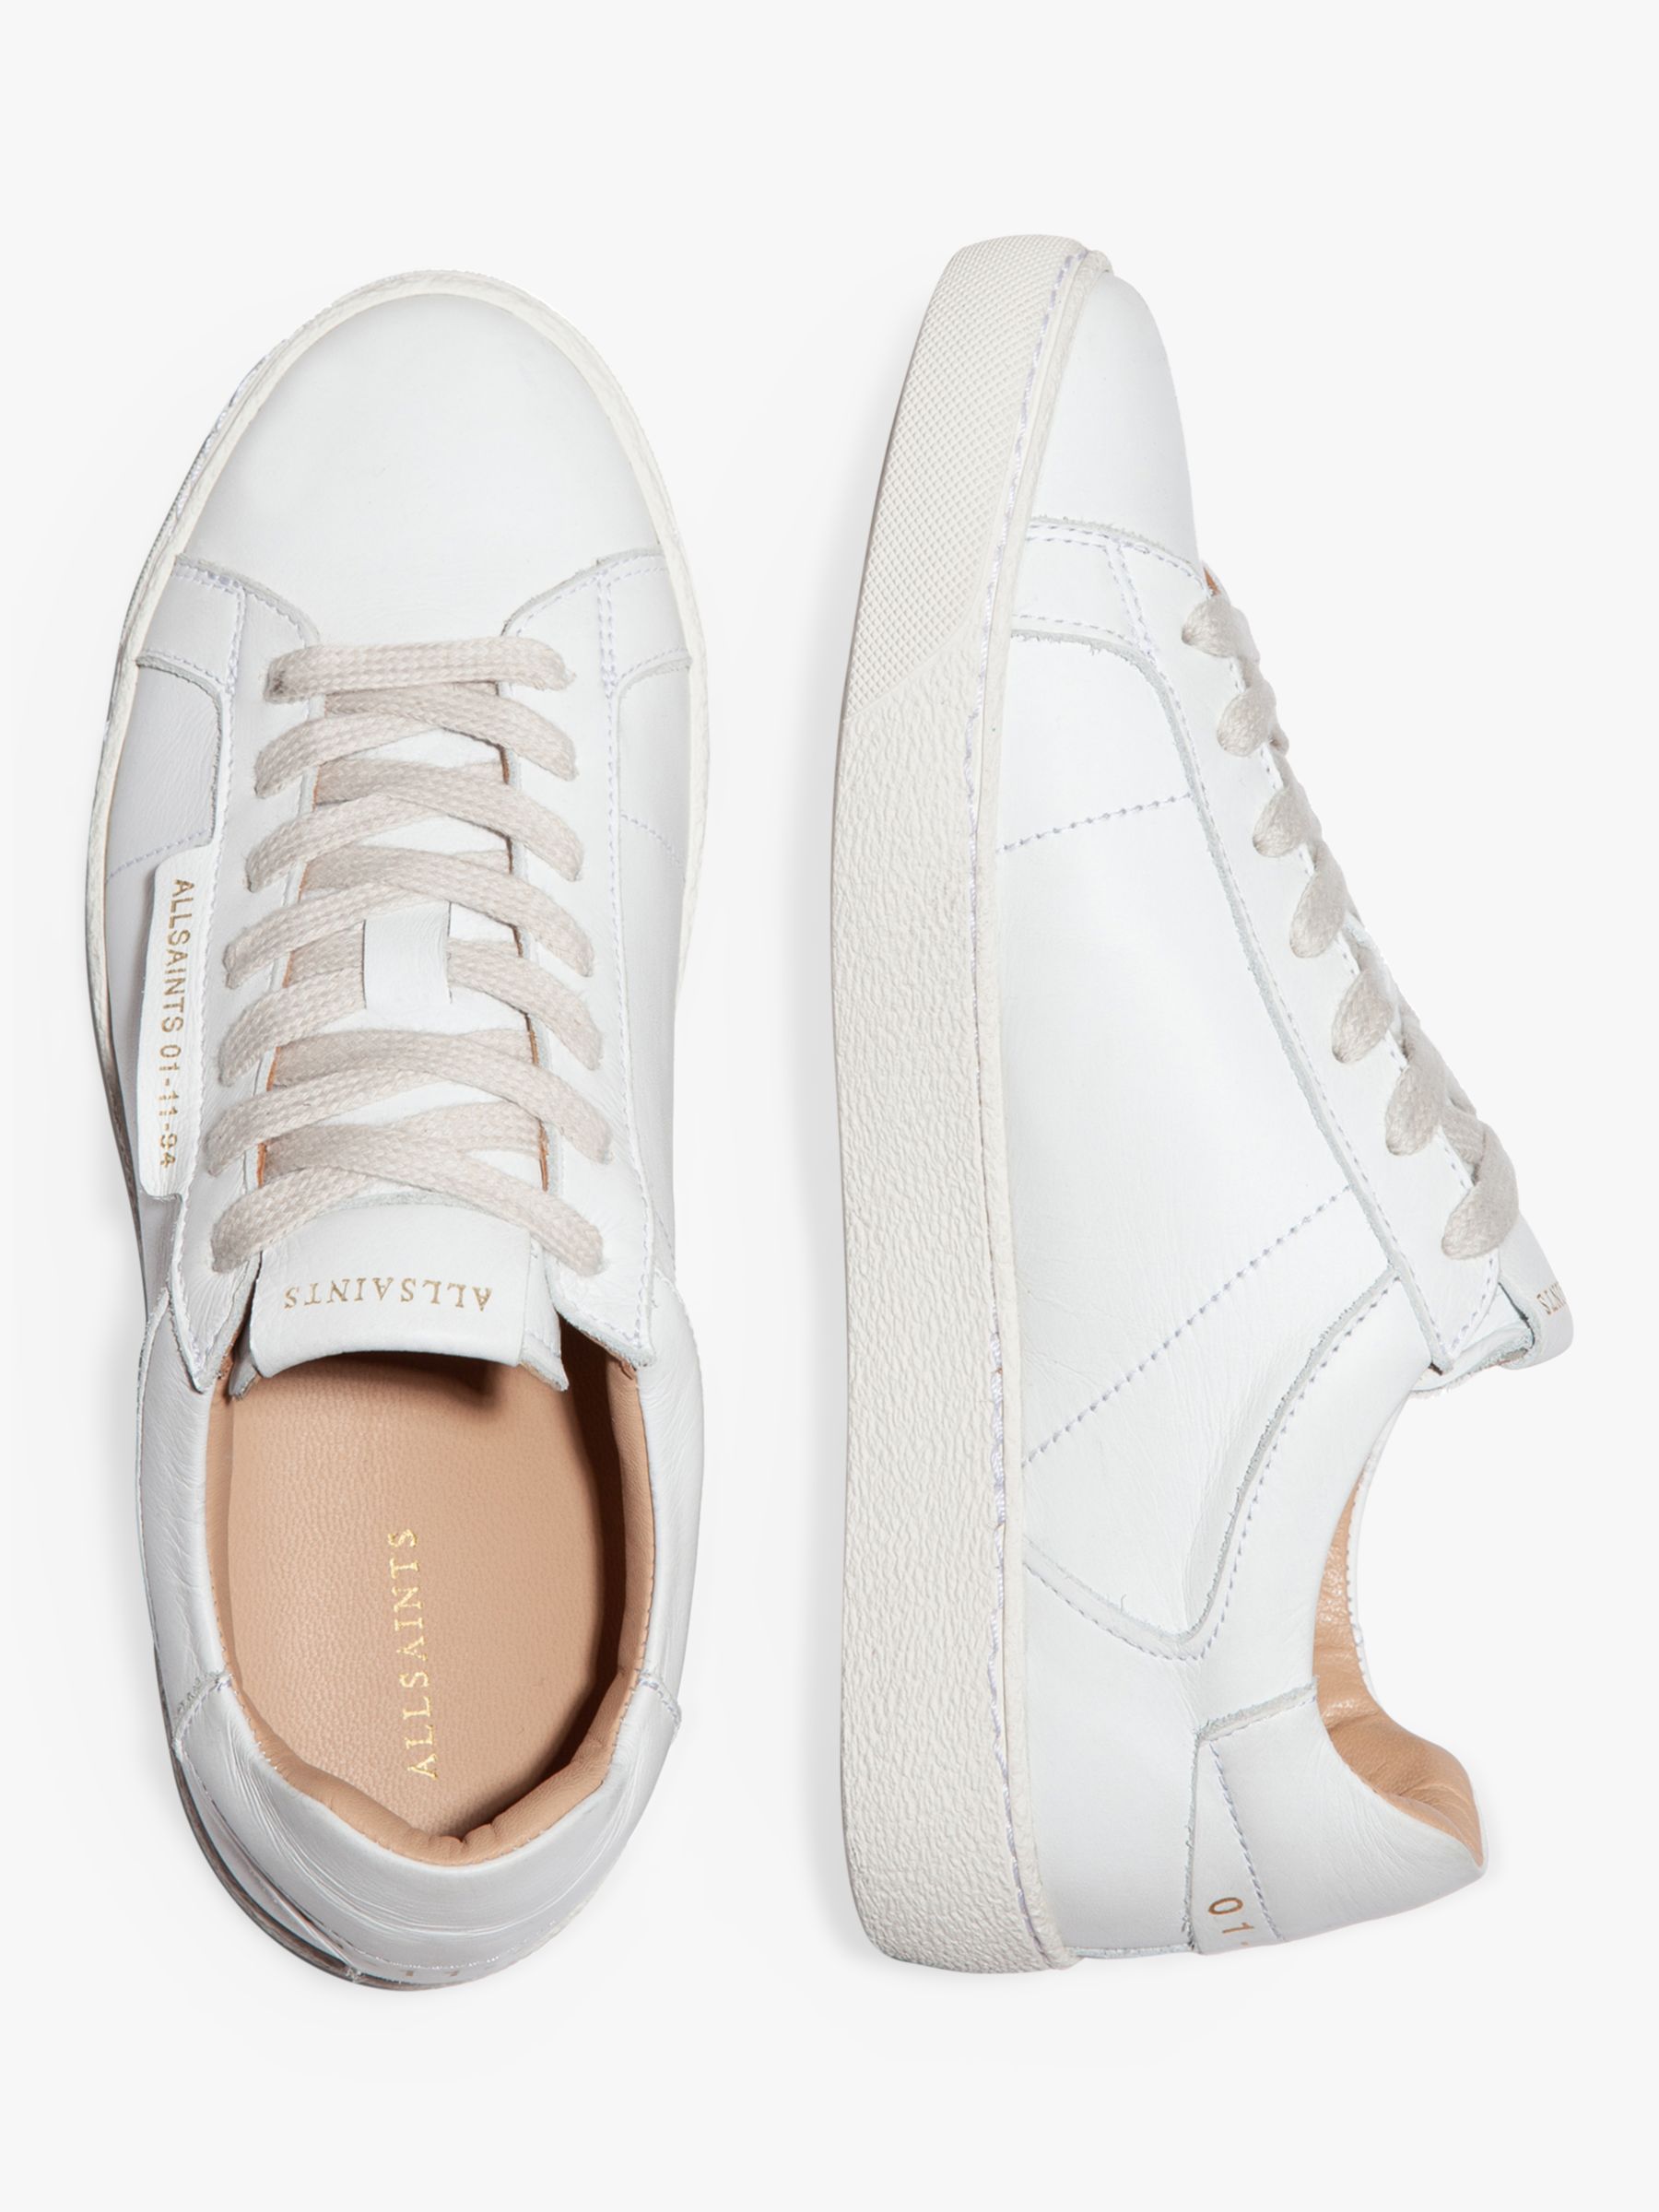 AllSaints Sheer Leather Lace-Up Trainers, White at John Lewis & Partners